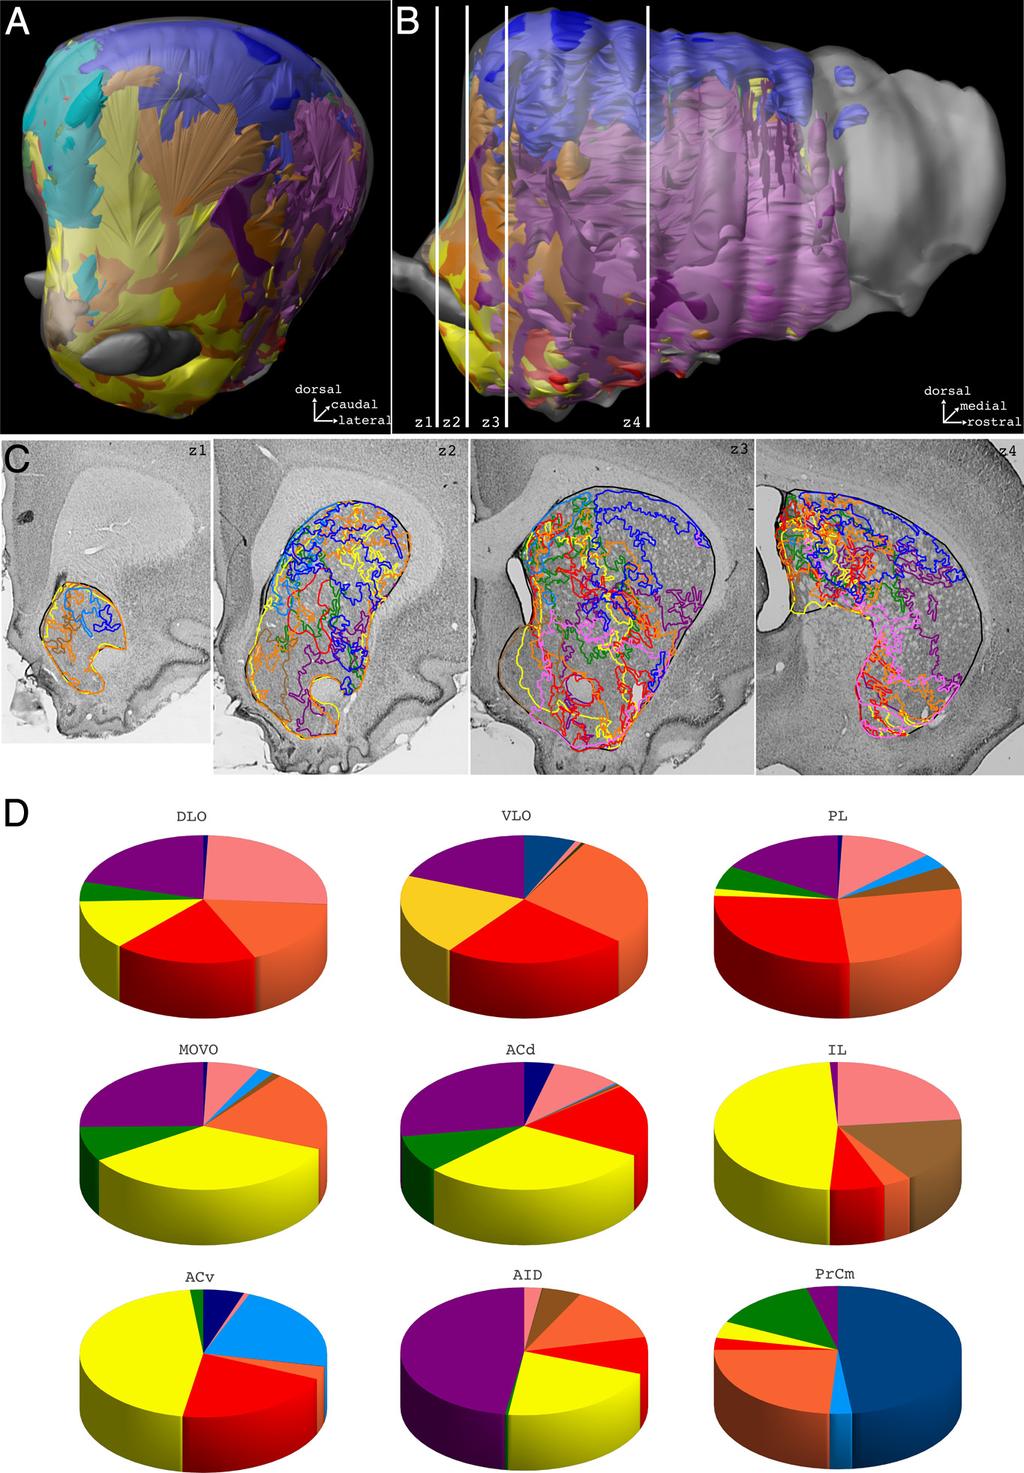 5724 J. Neurosci., March 27, 2013 33(13):5718 5727 Mailly et al. Rat Prefrontostriatal System in 3D separate cortical area reached a mean value of 47.